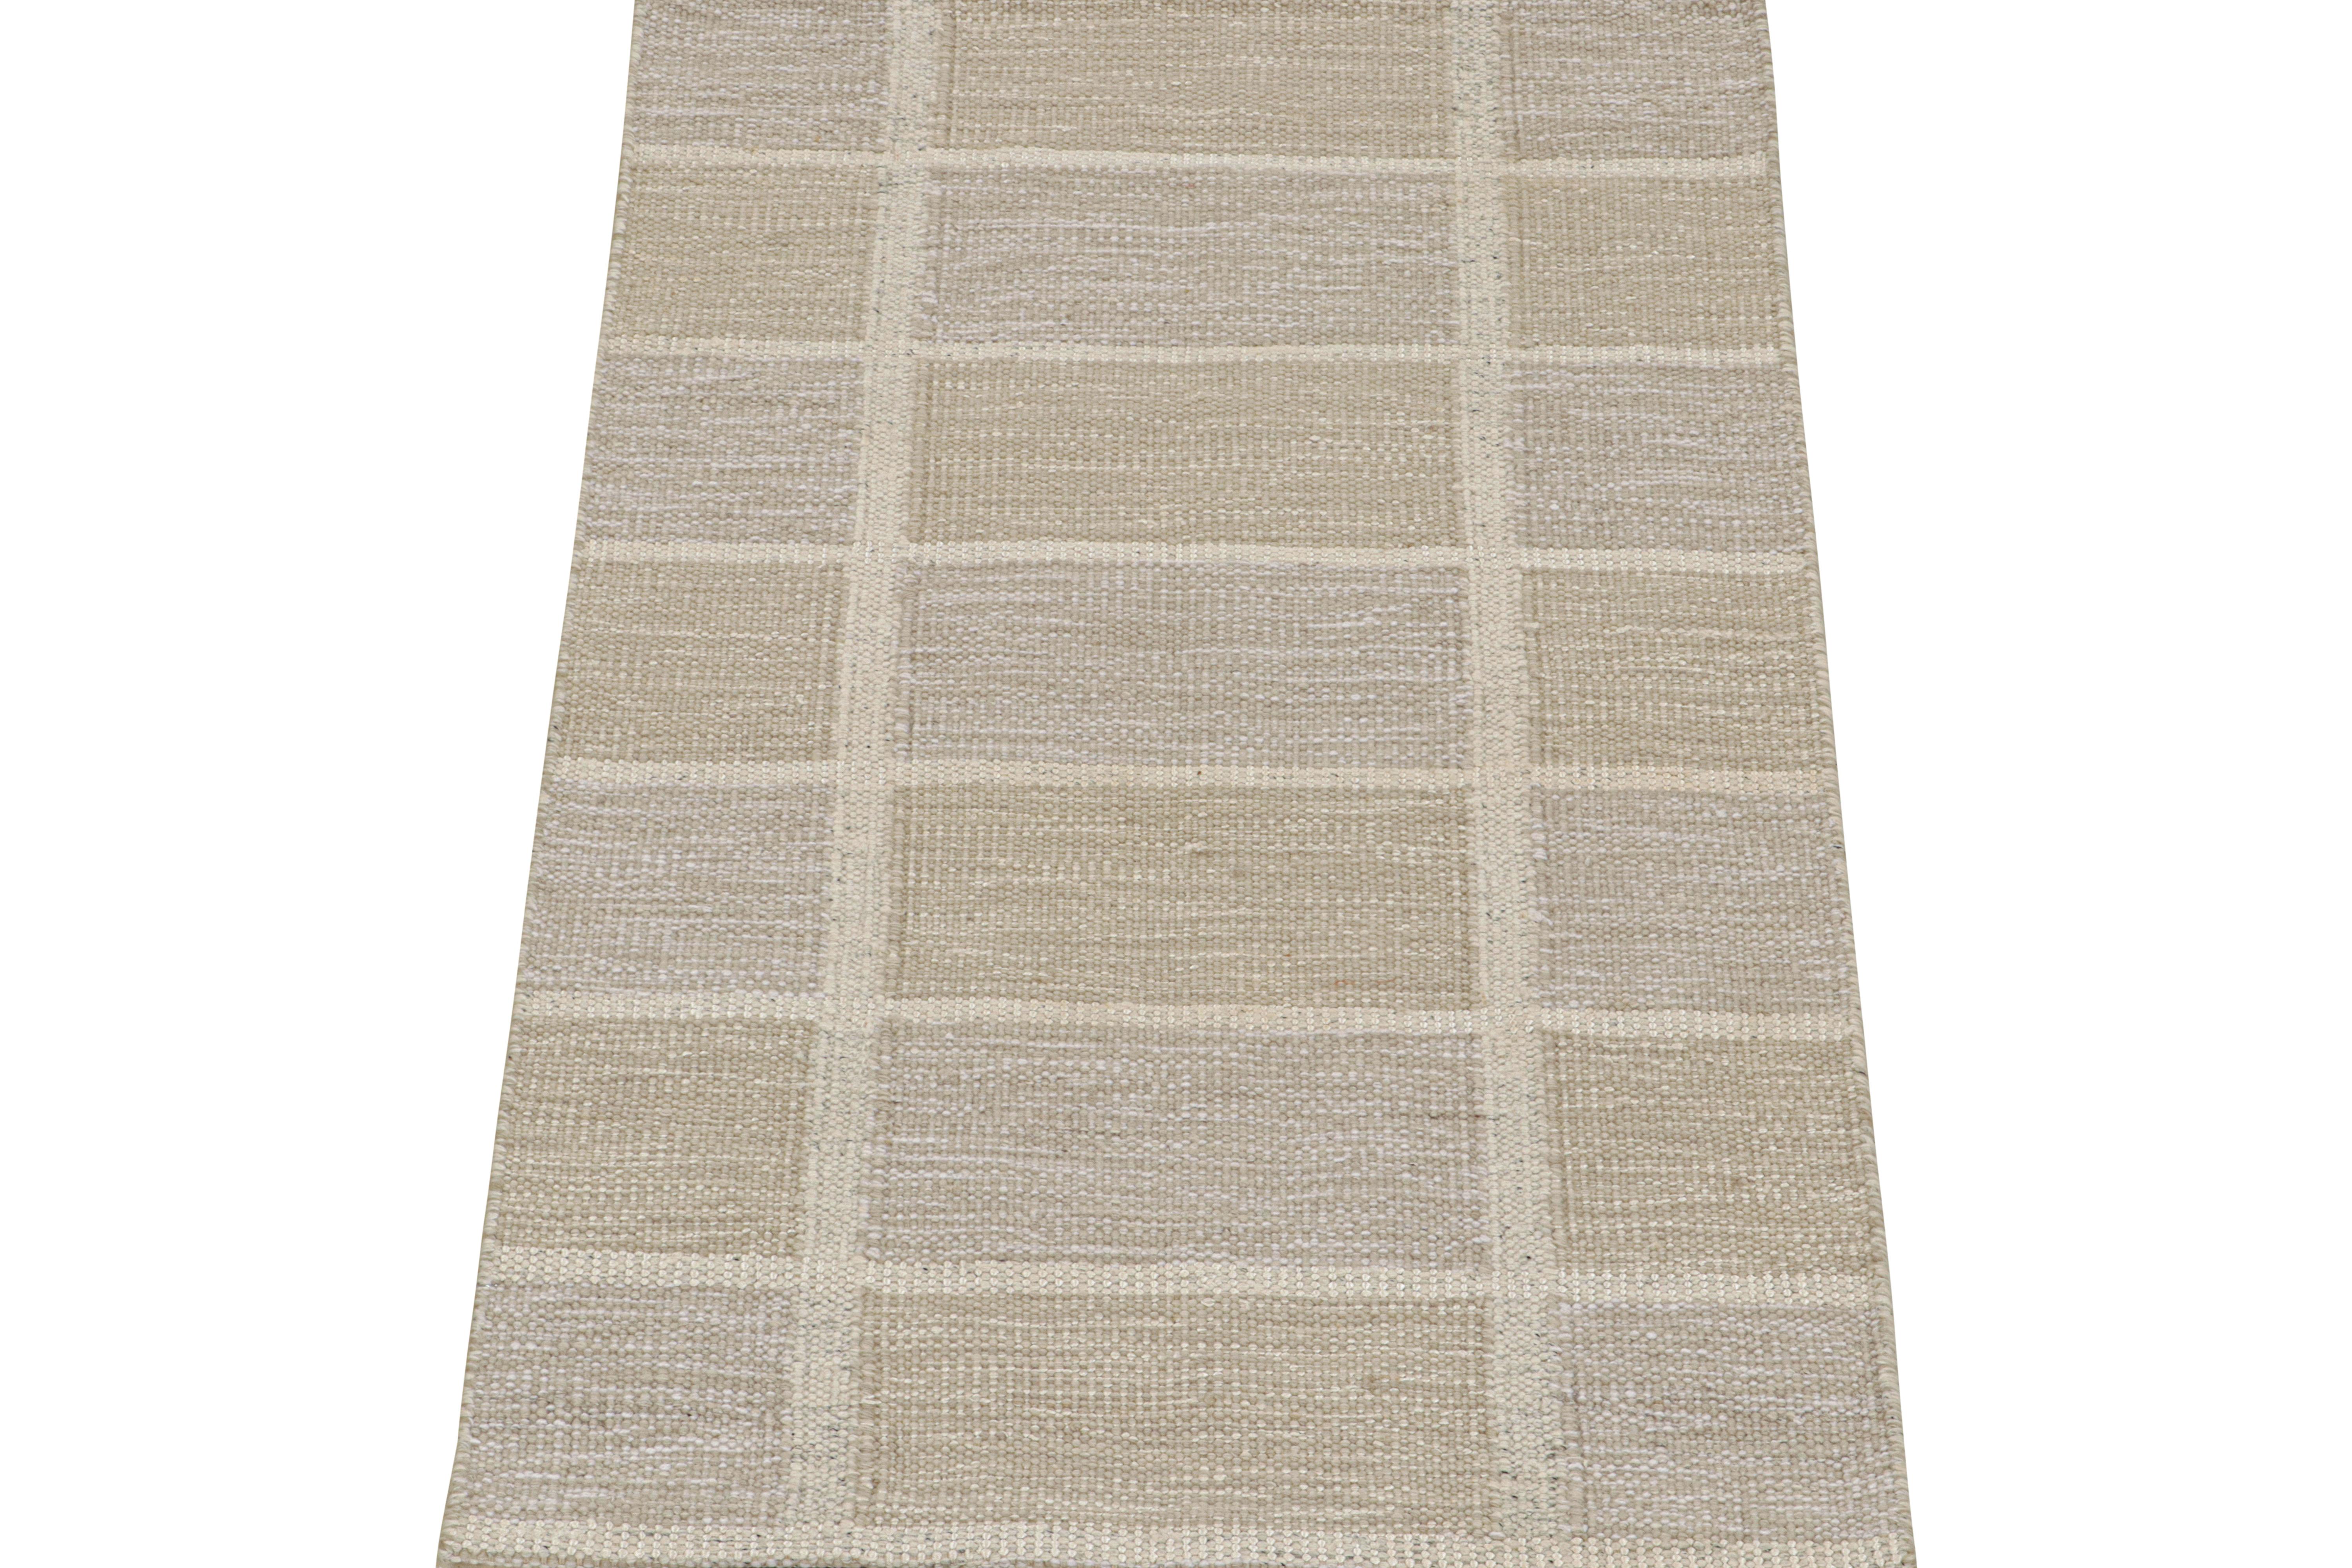 This 3x5 flat weave rug is a bold new addition to the Scandinavian Collection by Rug & Kilim. Handwoven in a strong semi-vested wool, its design reflects a contemporary take on mid-century Rollakans and Swedish Deco style.

On the Design:

This new